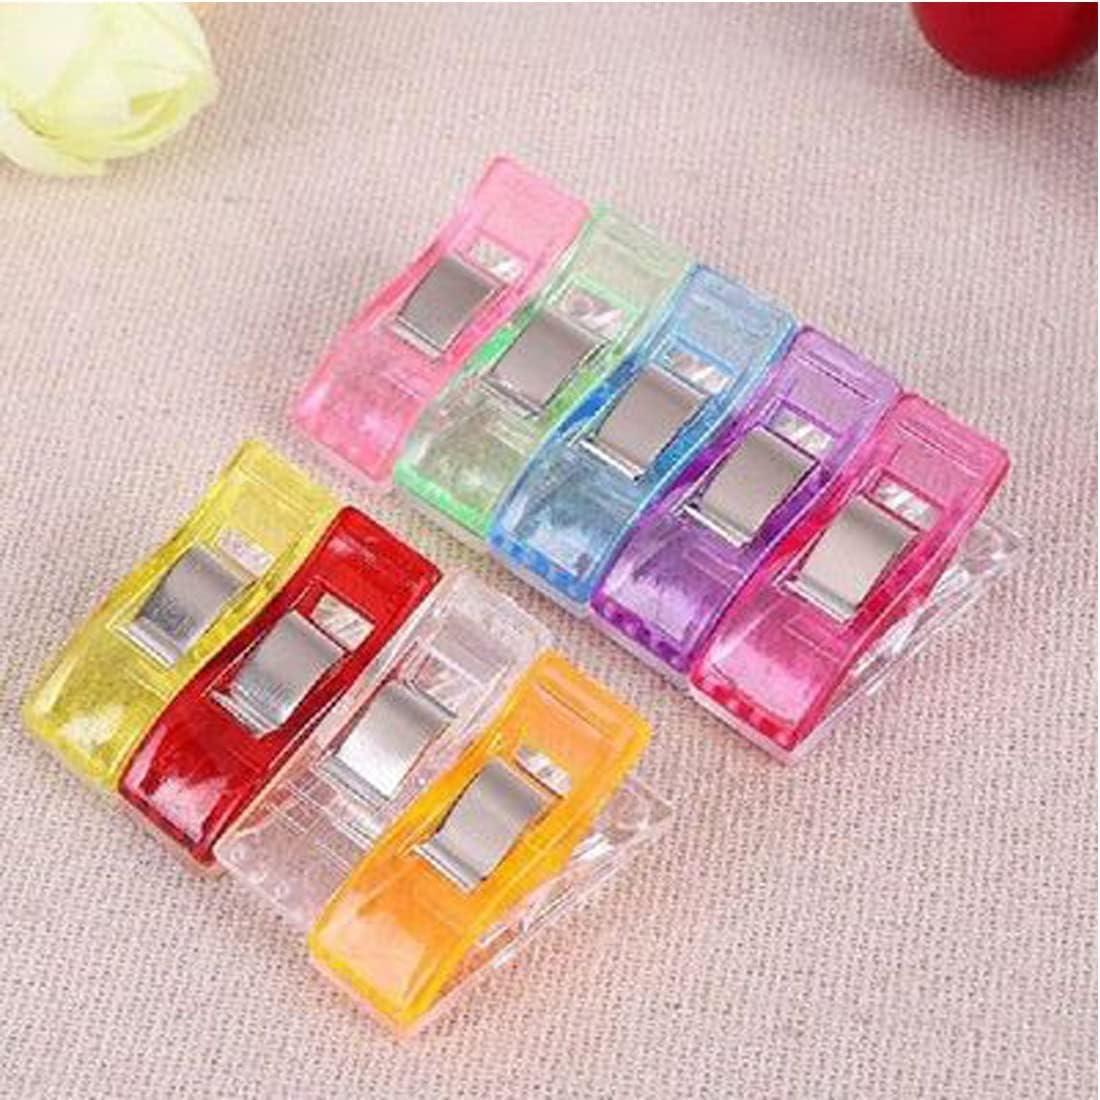 Otylzto 100pcs Sewing Clips for Quilting Crafting,Wonder Clips, Quilting Clips,Craft Clips,Plastic Clips for Crafts,Plastic Clip for Crafts,Wonder